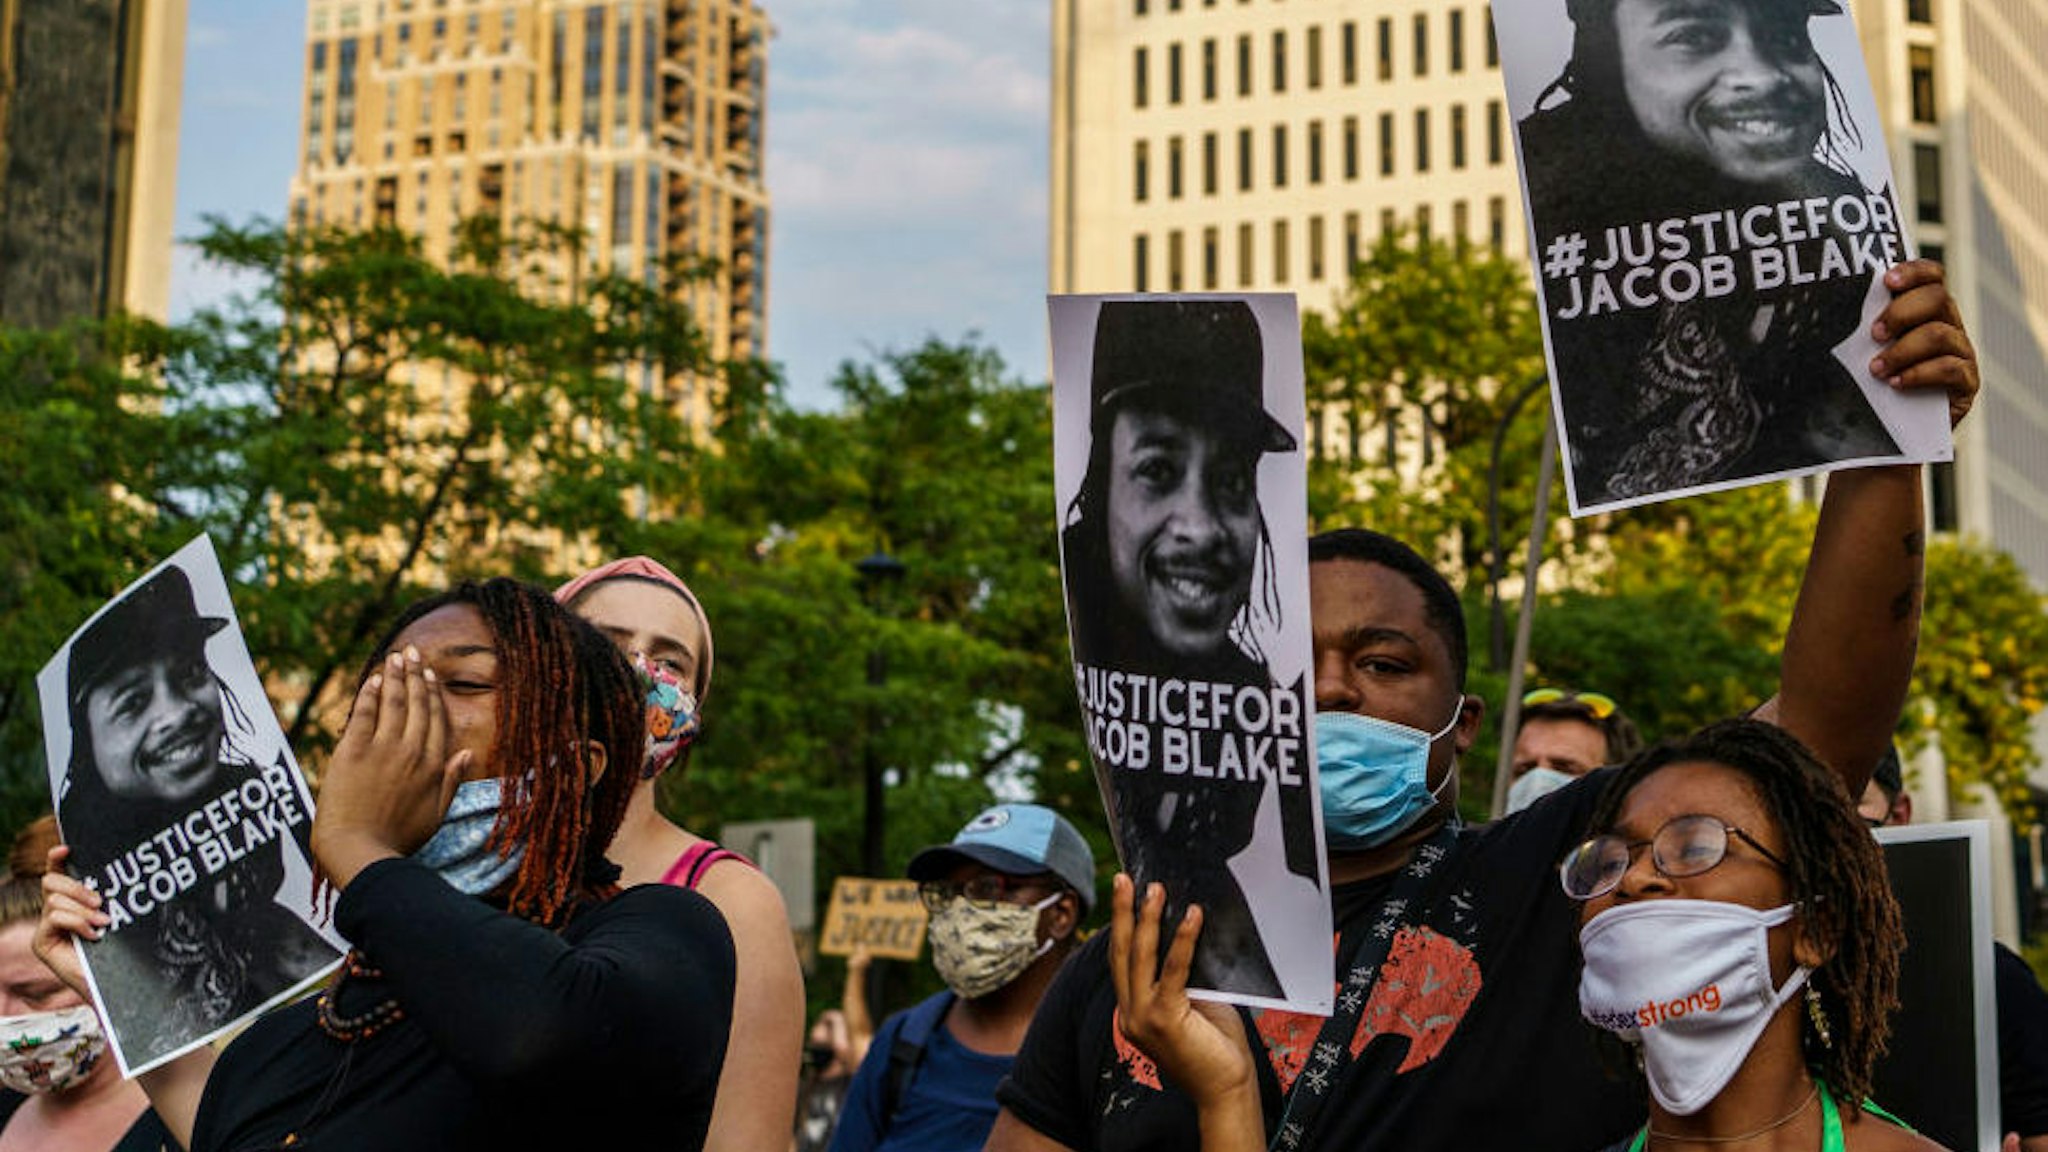 Protesters hold signs outside the Minneapolis 1st Police precinct during a demonstration against police brutality and racism on August 24, 2020 in Minneapolis, Minnesota.